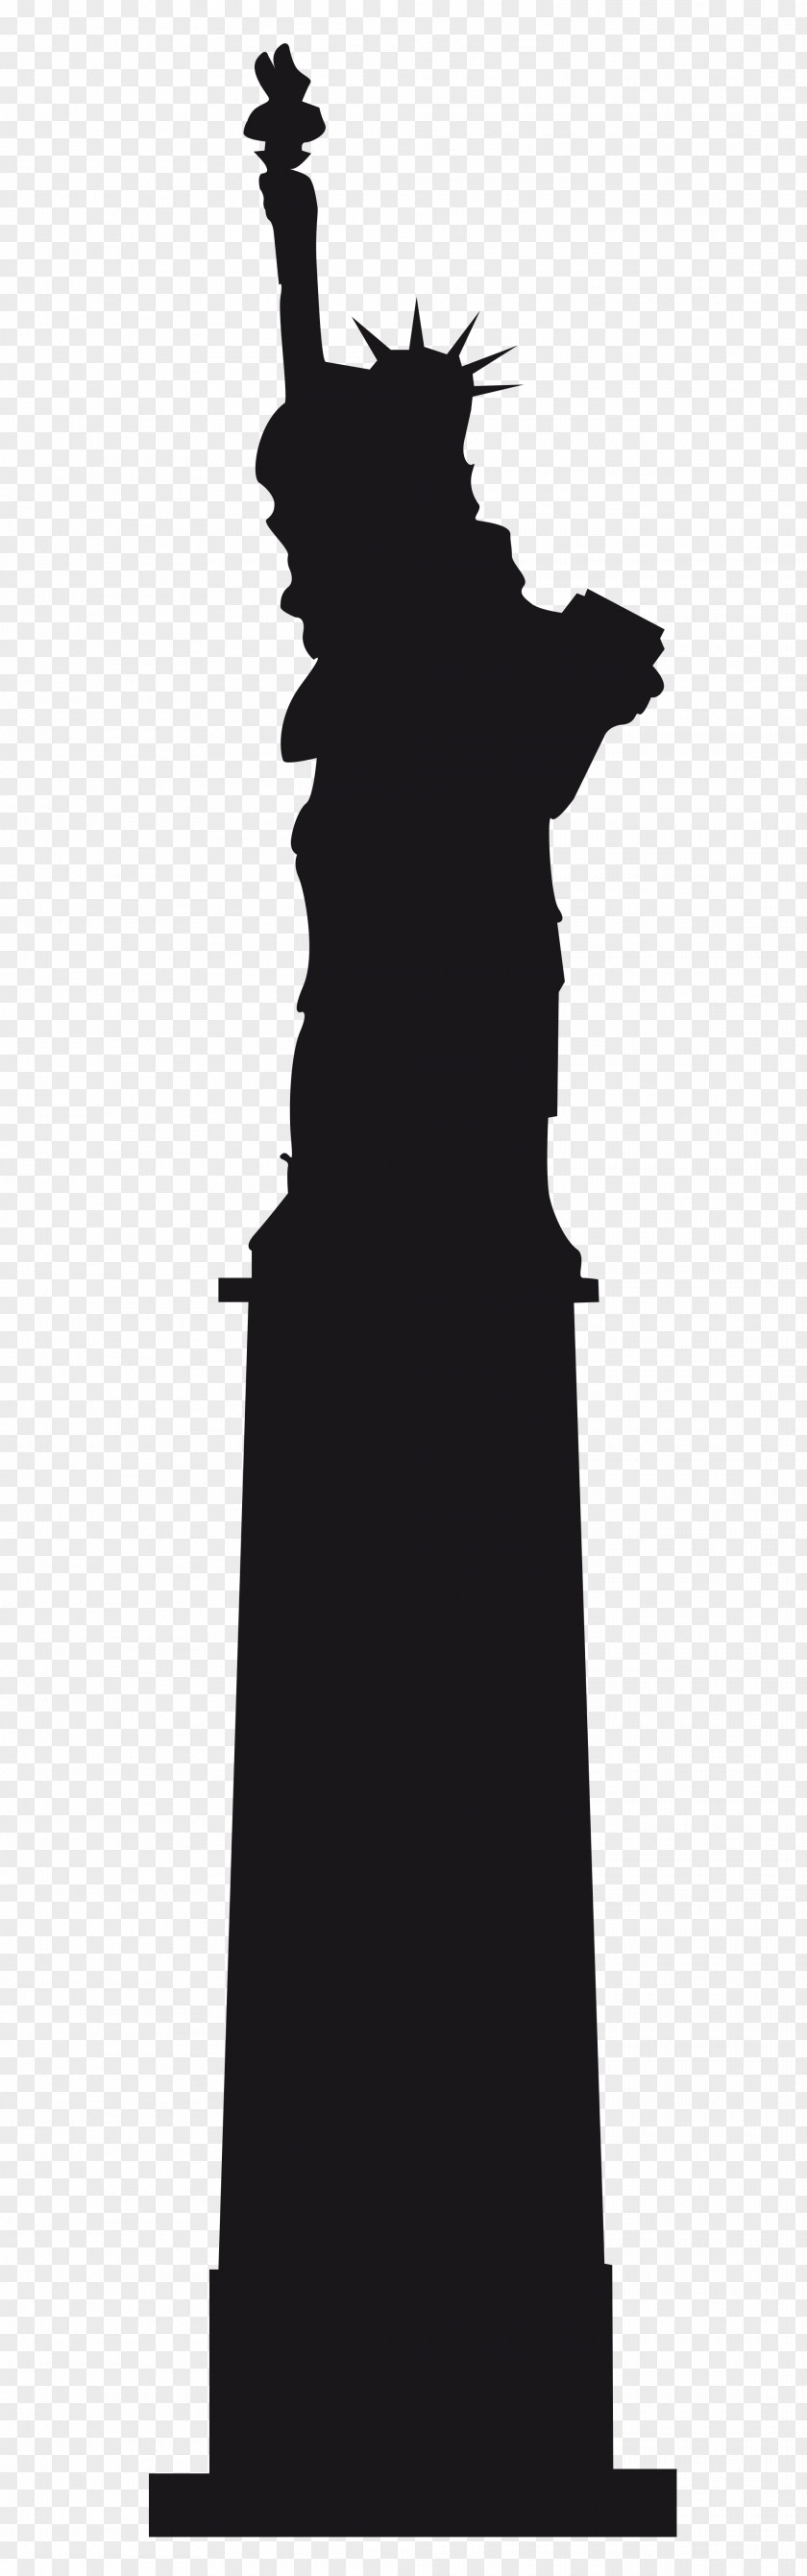 Statue Of Liberty Paris Silhouette PNG